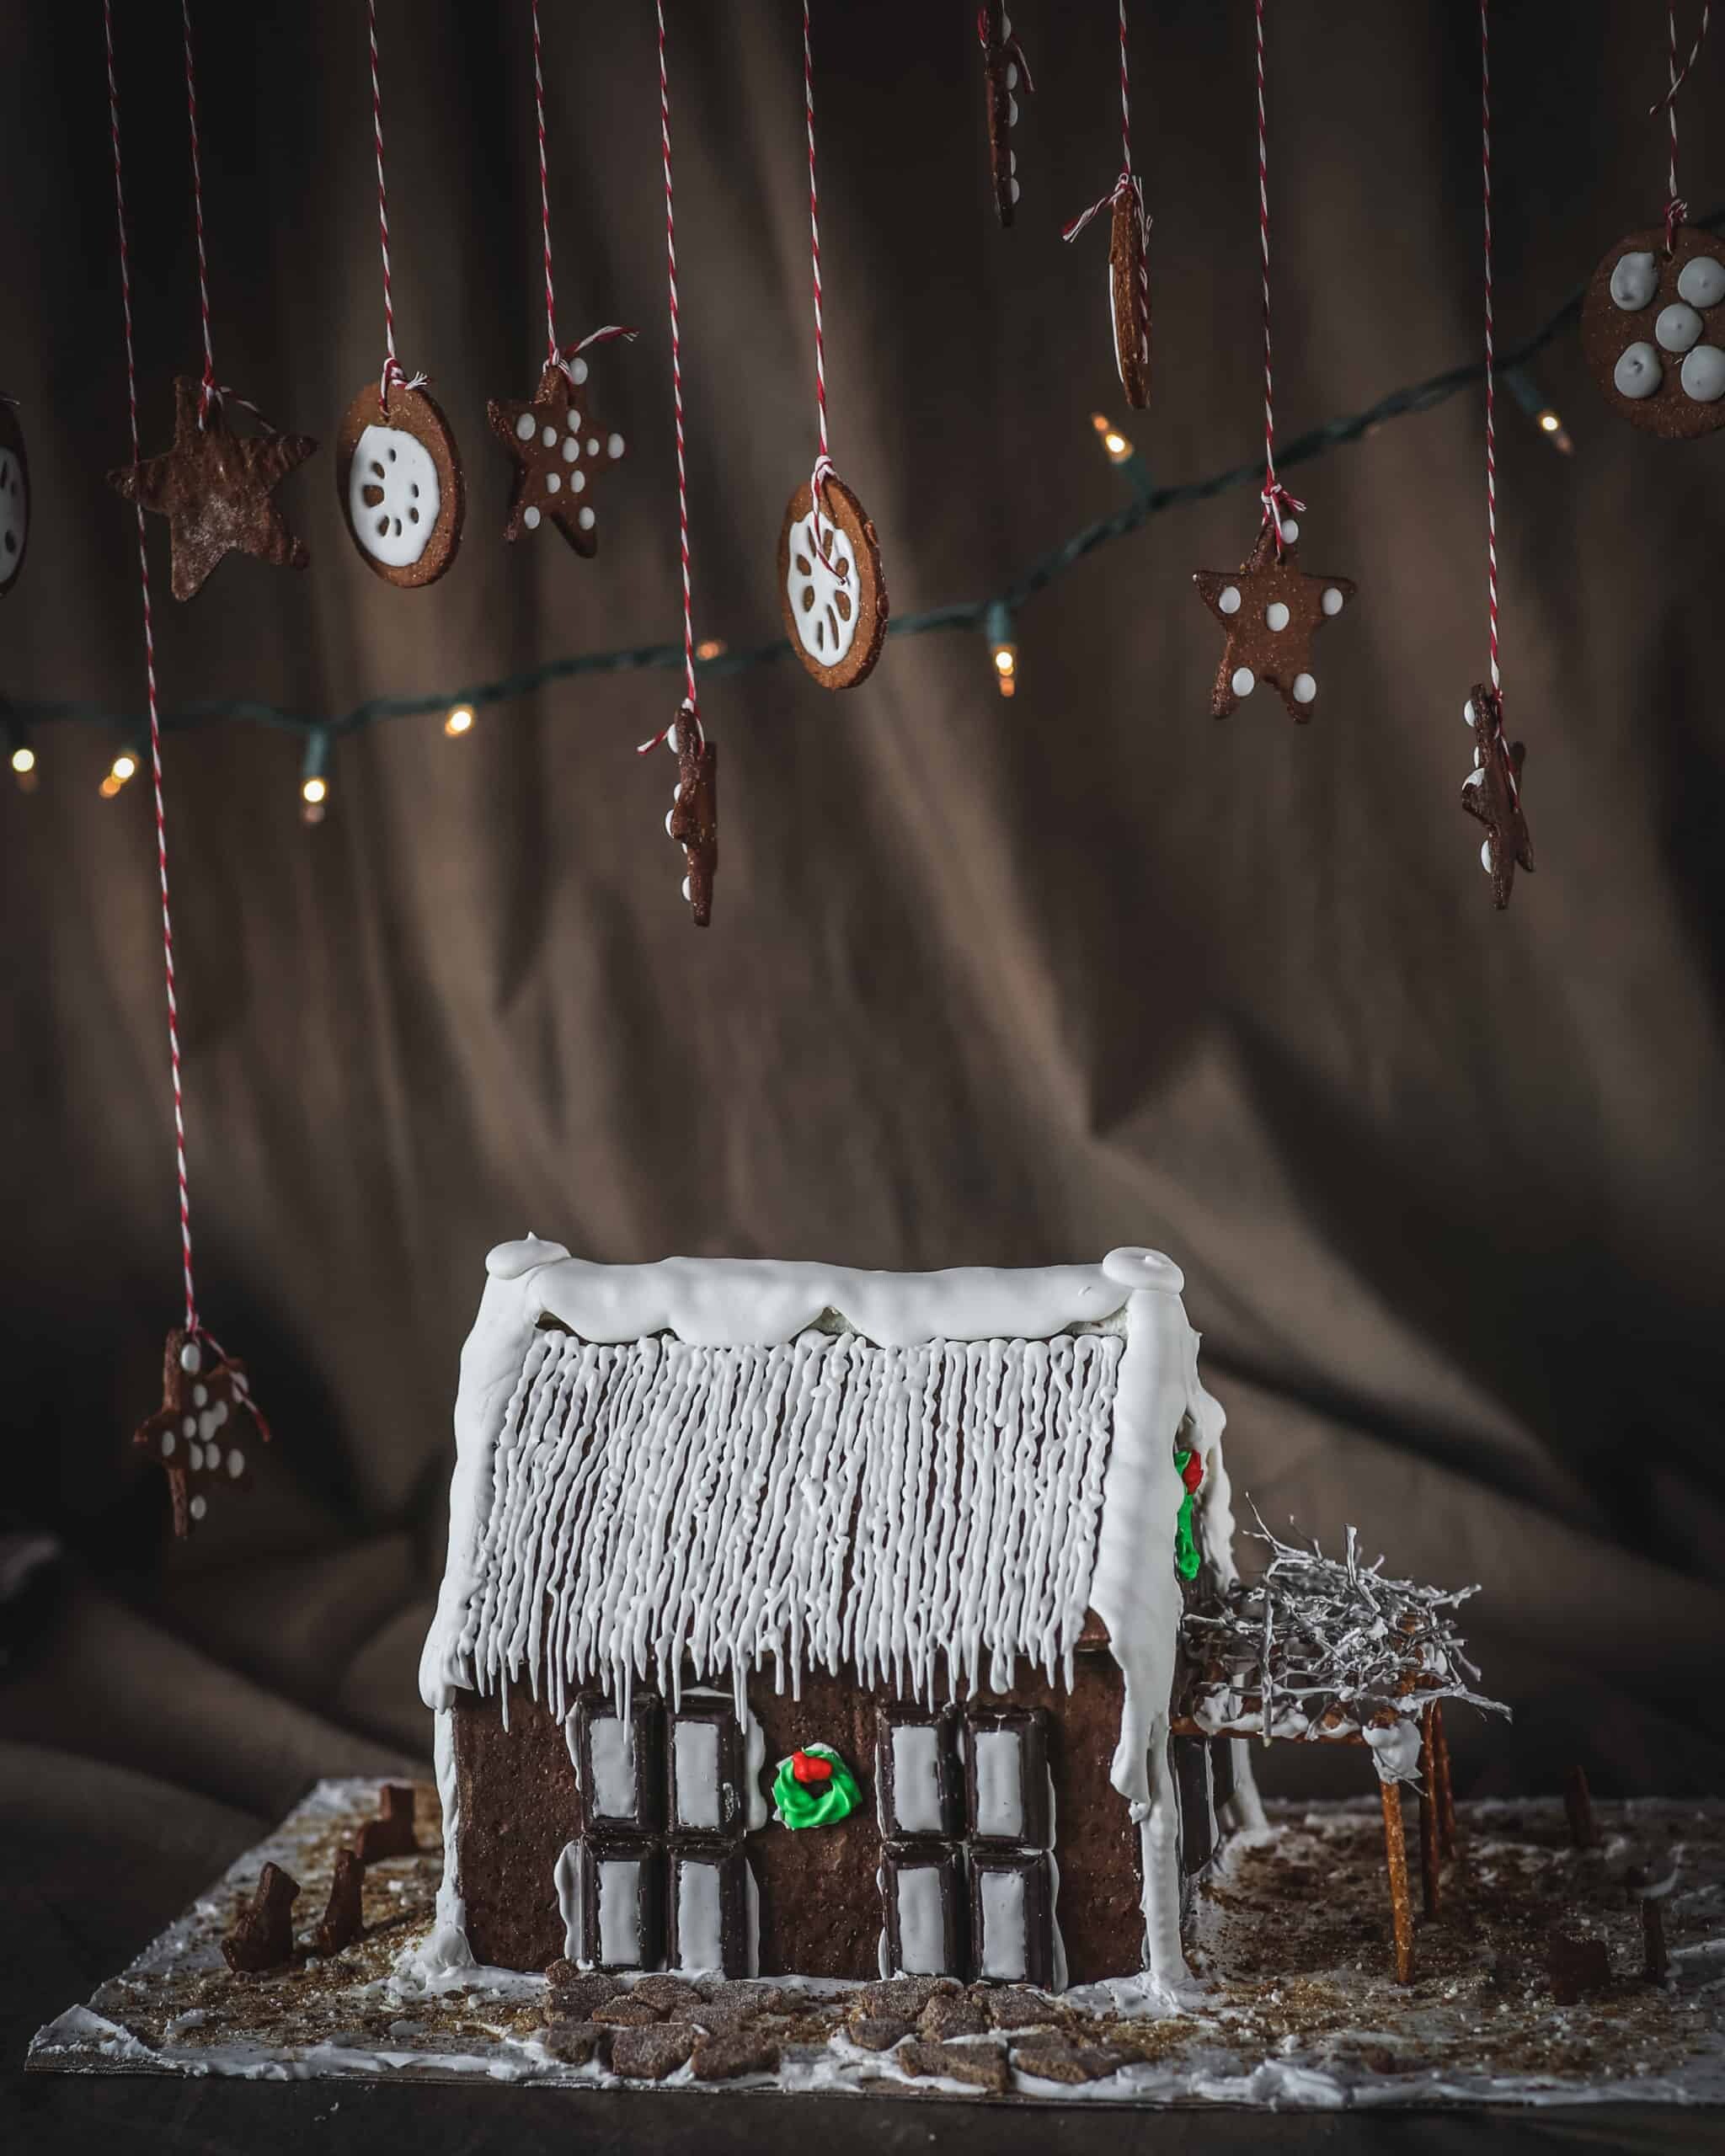 Gingerbread House: Christmas snow icing, Bakery, Cookies, Hand-made confectionary, Sugar-filled winter wonderland. 2050x2560 HD Background.